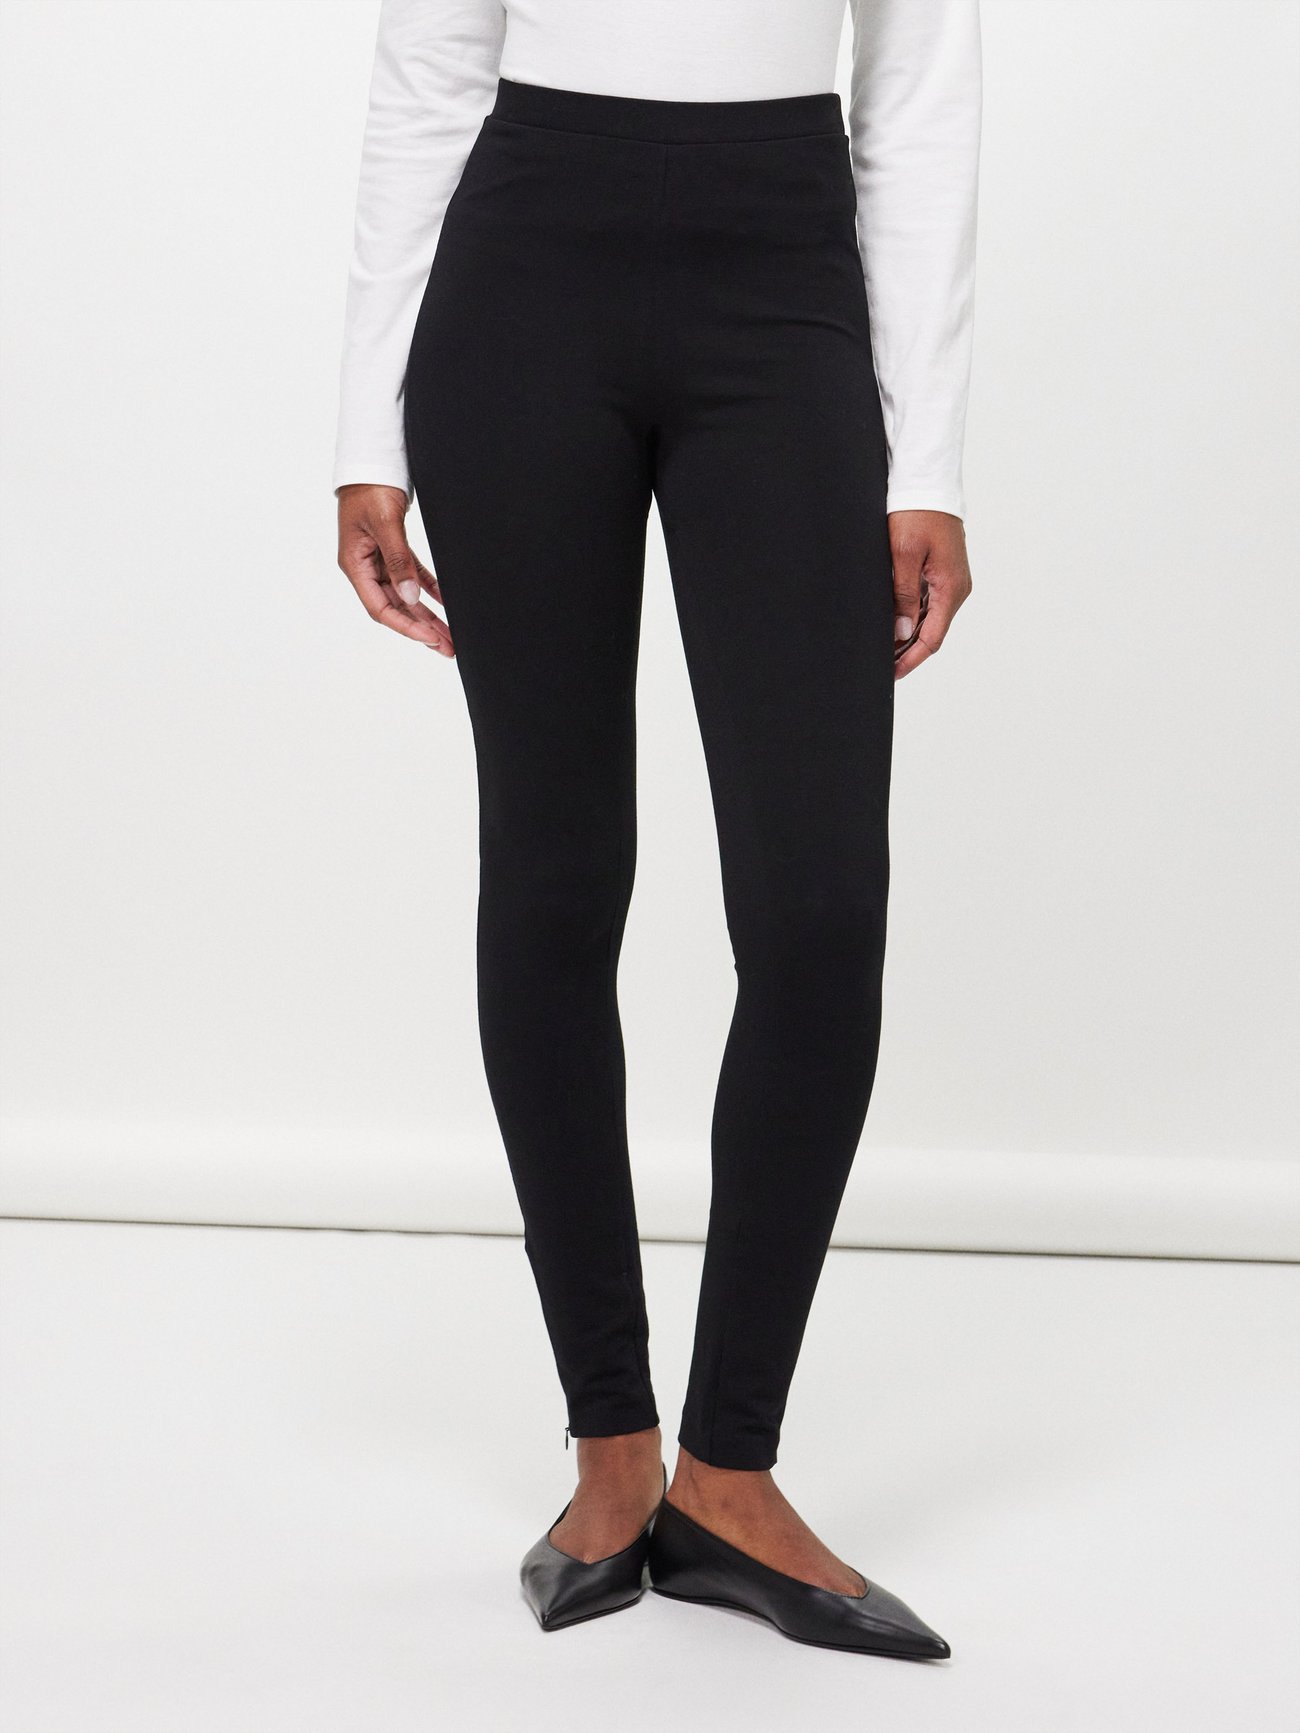 Women's Leggings With Zip Cuffs by Toteme